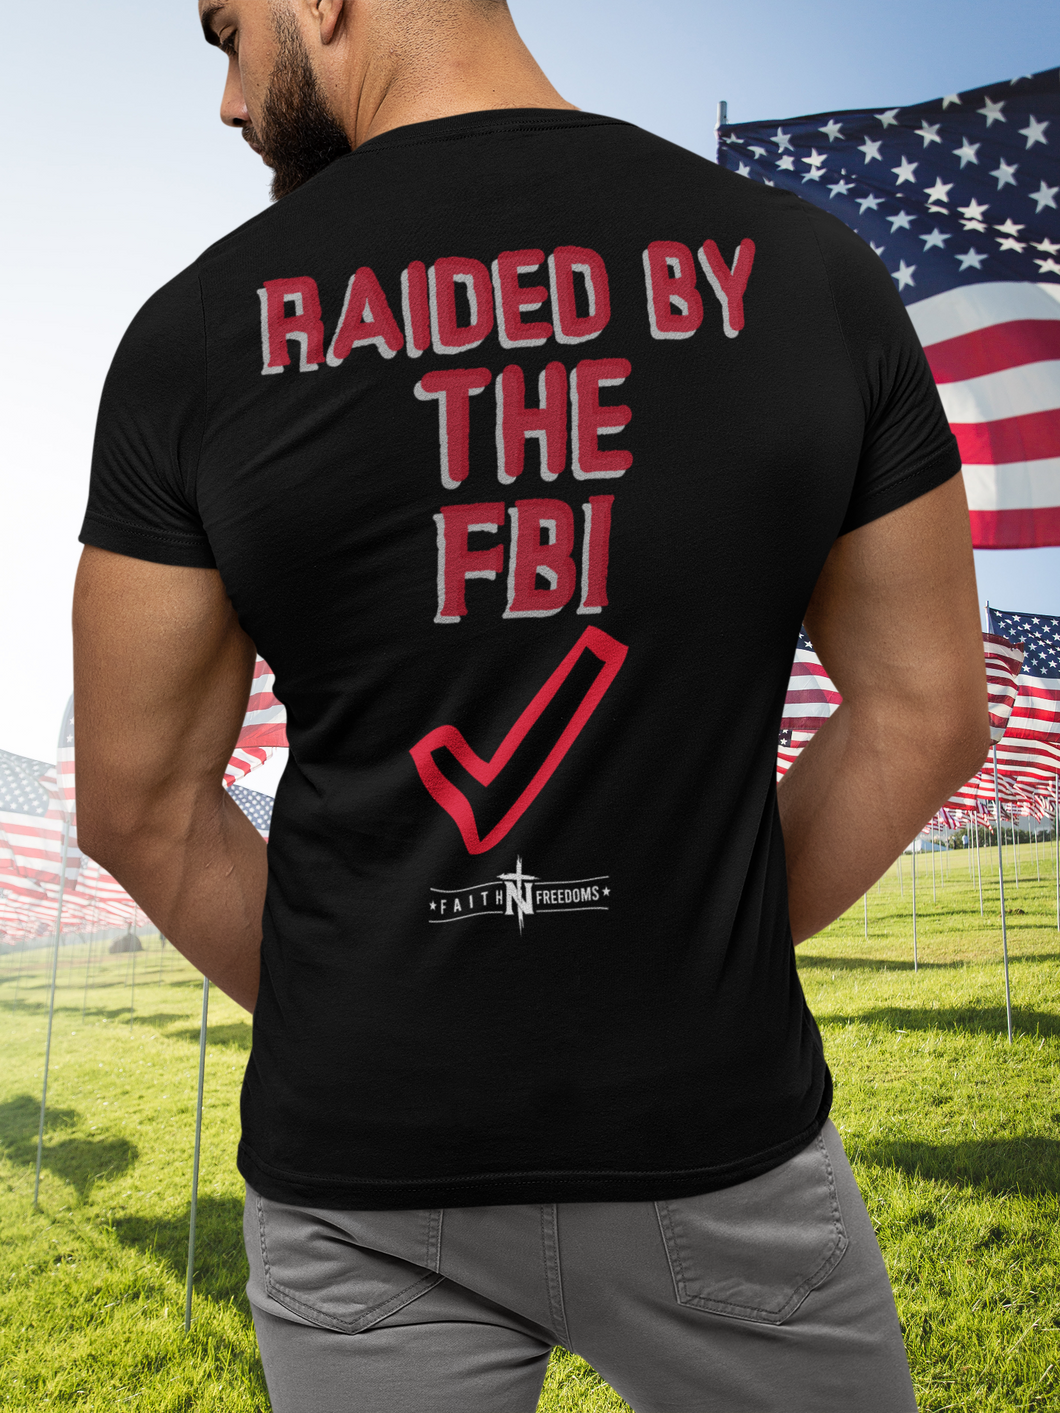 Requirement To Get My Vote /Raided by the FBI T-Shirt